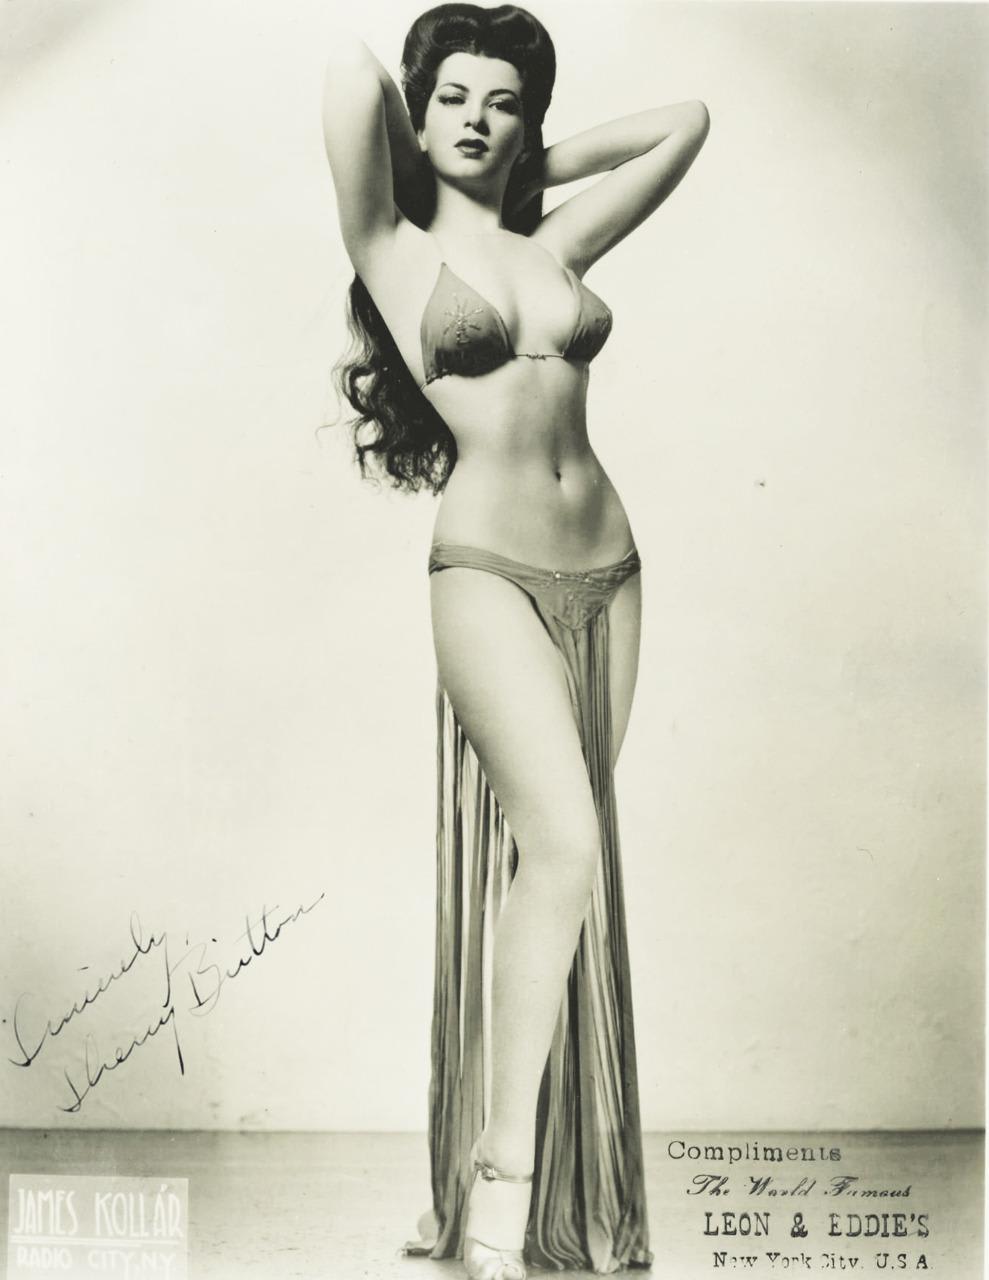 1930's Burlesque dancer Sherry Britton was 5-foot-3-inch (1.60 m) tall with an 18-inch (46 cm) waist, and was once said to have a "figure to die for."